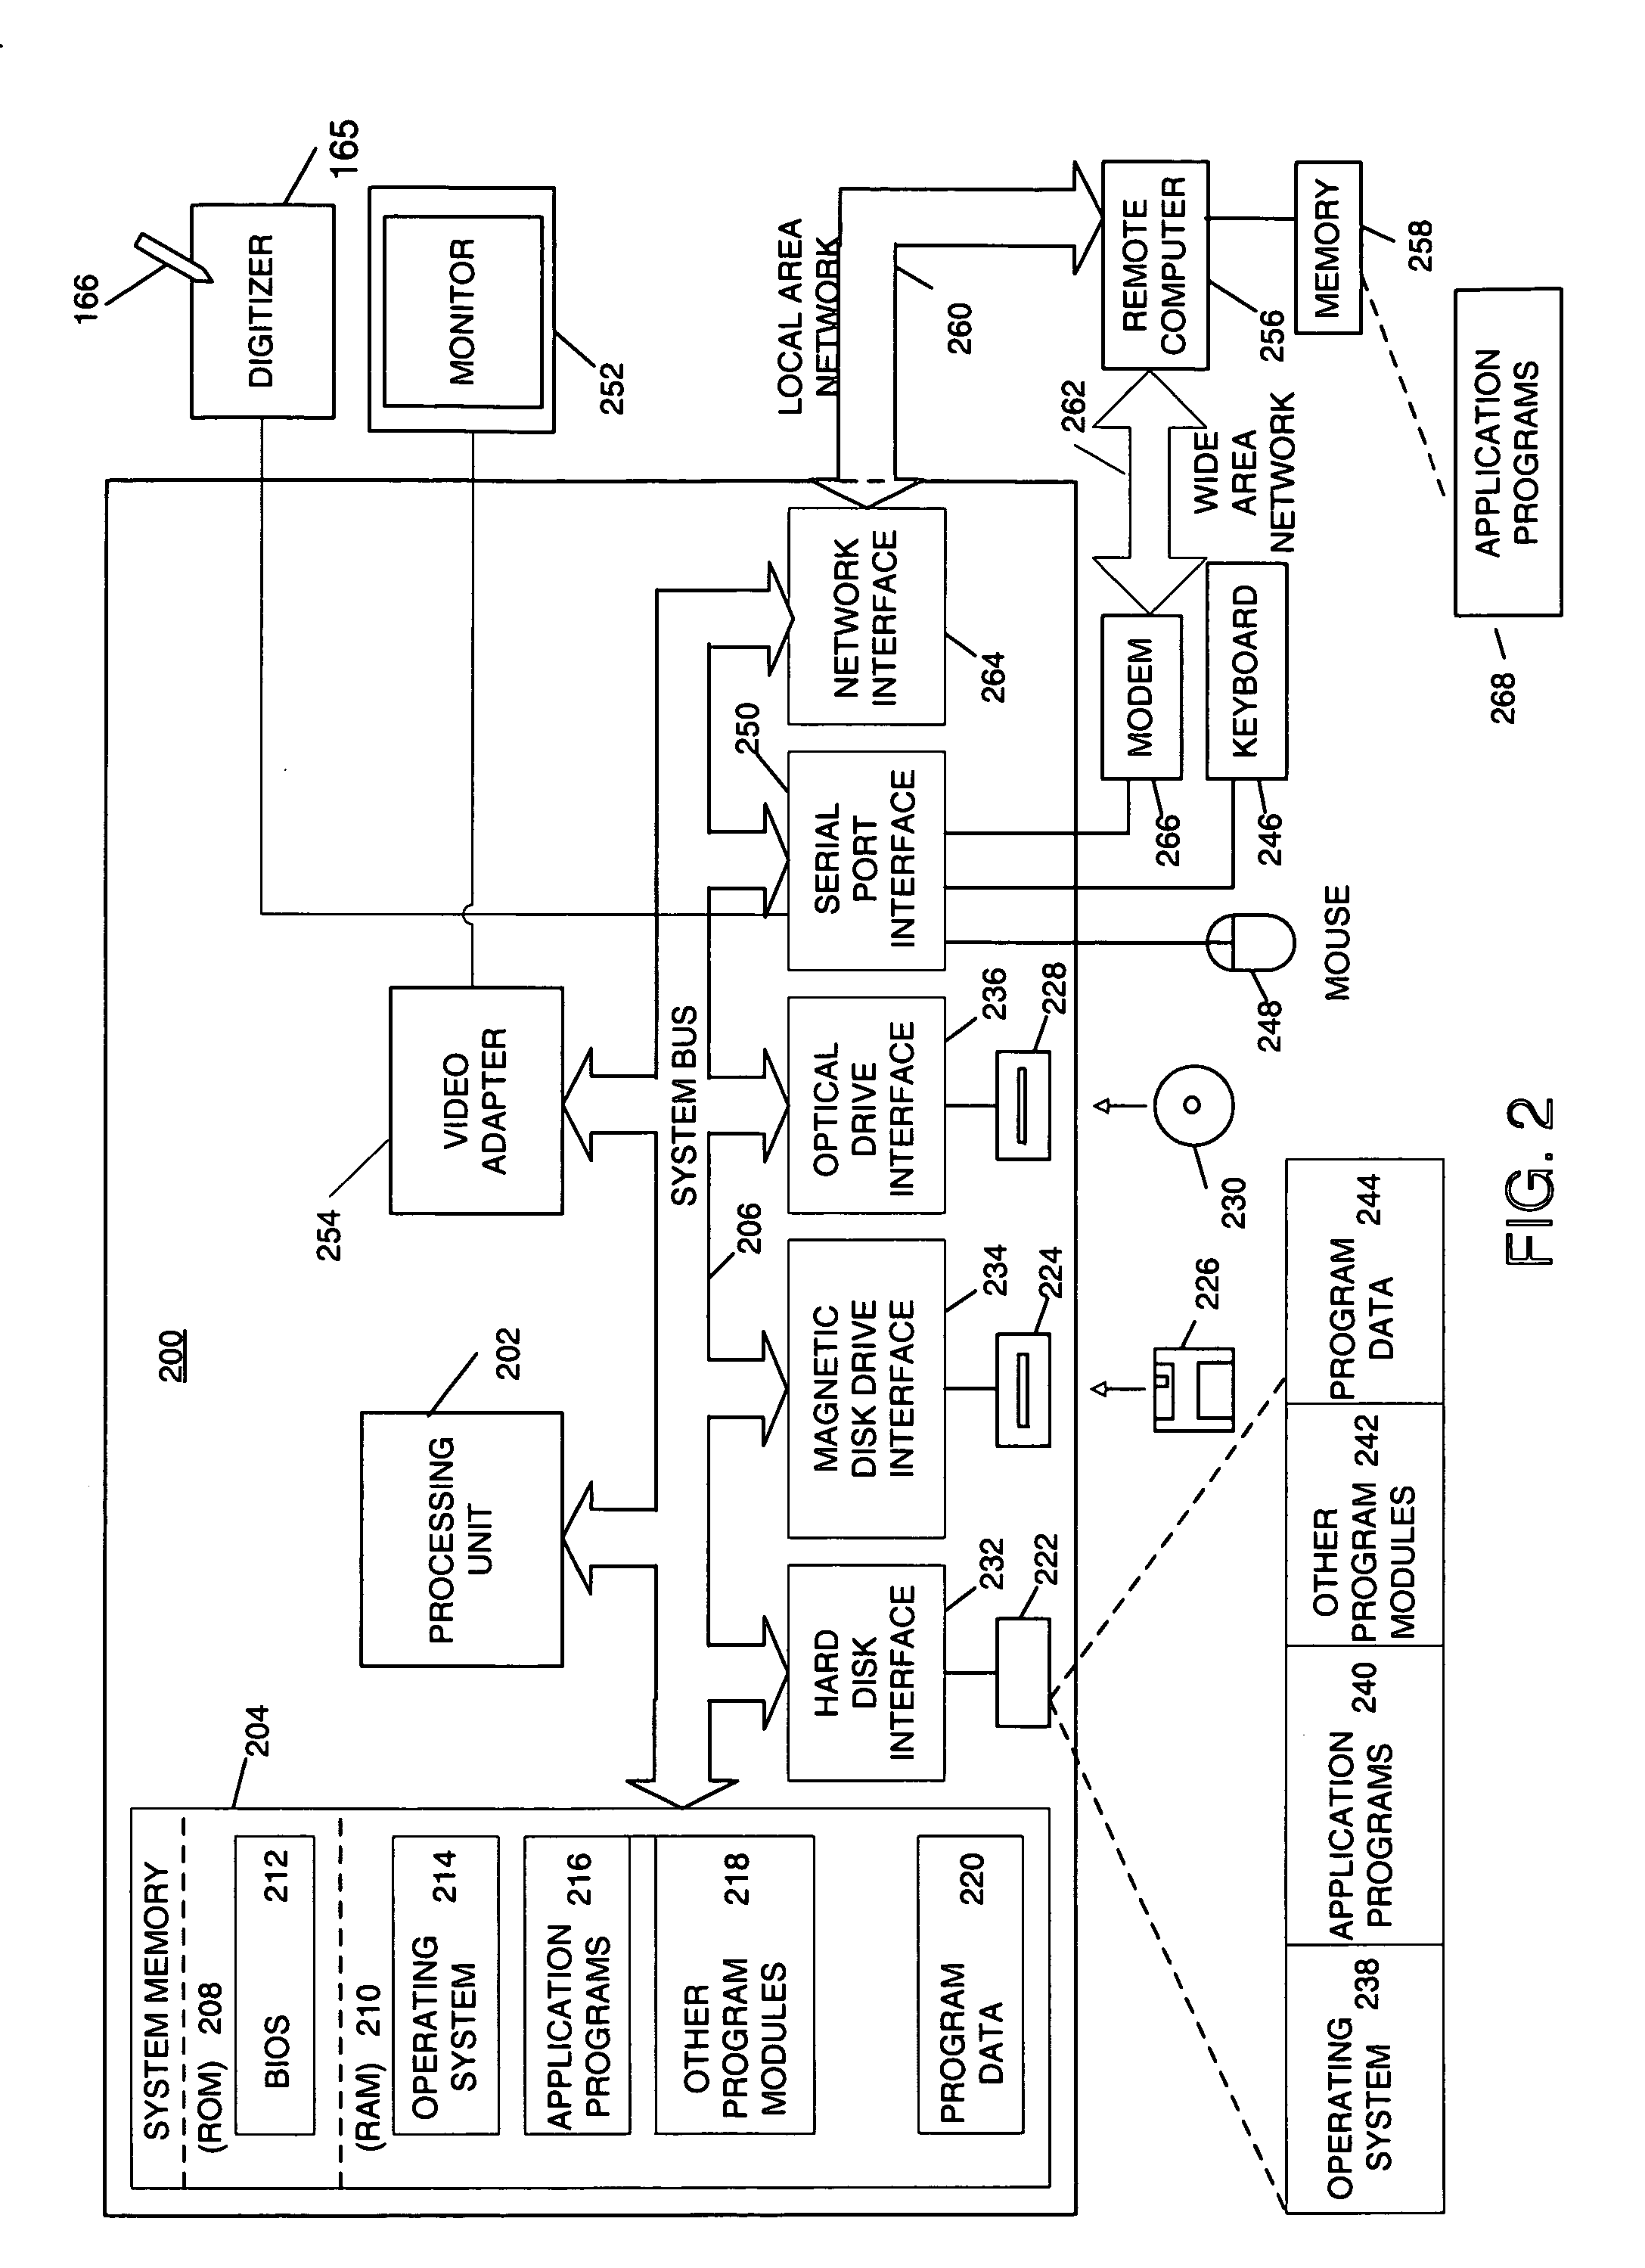 Enhanced input using packet switching over a PS/2 or other interface